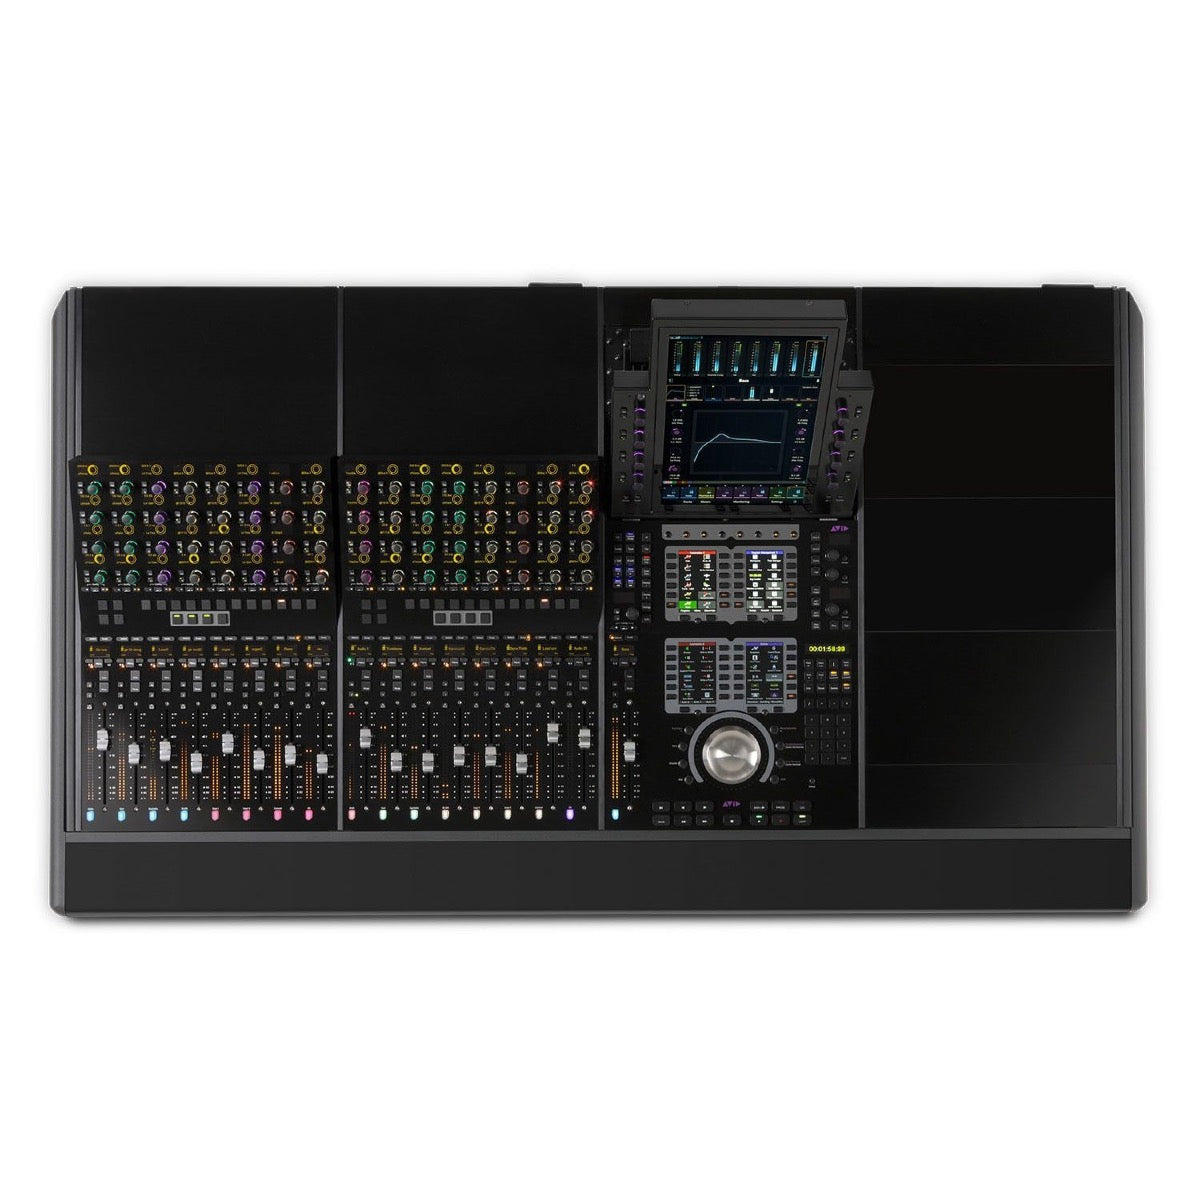 AVID S4-16 Fader 4ft System (Includes 1yr ExprertPlus w/ Hardware Coverage)